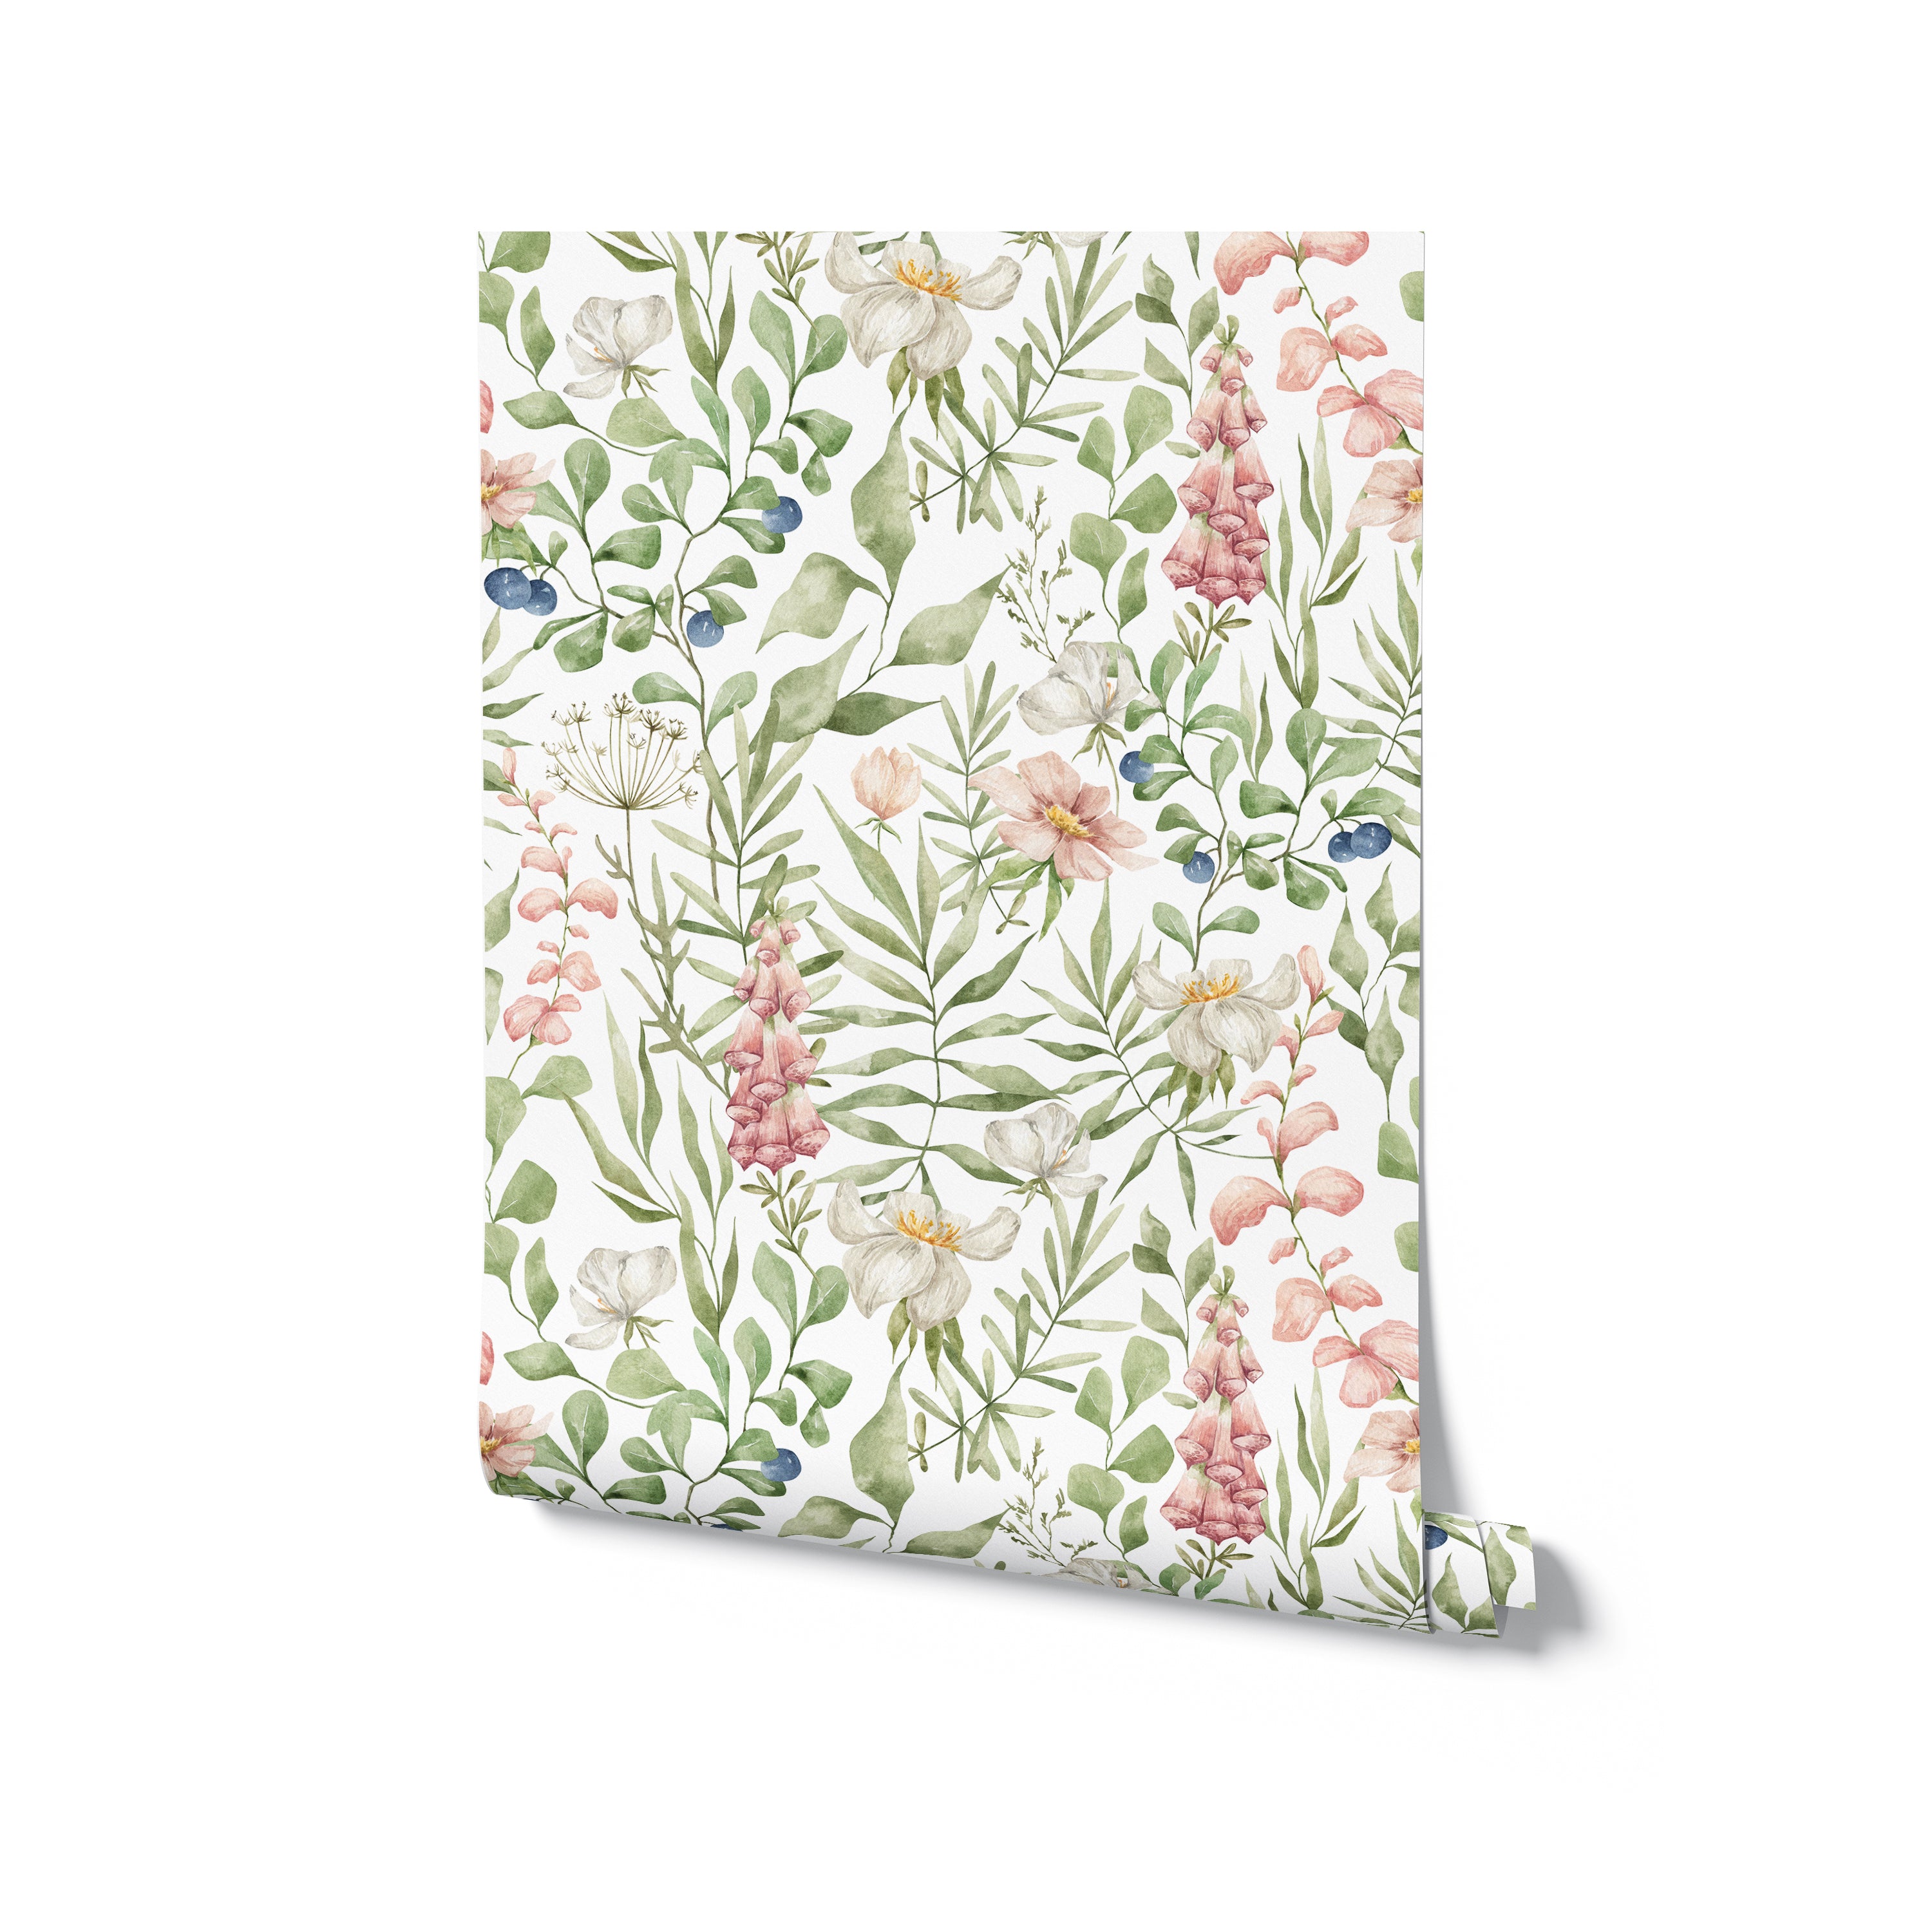 A digitally depicted roll of Watercolour Floral and Leaf Wallpaper, showing off a painterly arrangement of flowers and leaves in a watercolor style. The soft pastels and vibrant greens suggest a fresh, spring-like atmosphere, perfect for interior spaces that aim to capture the essence of a blooming garden.